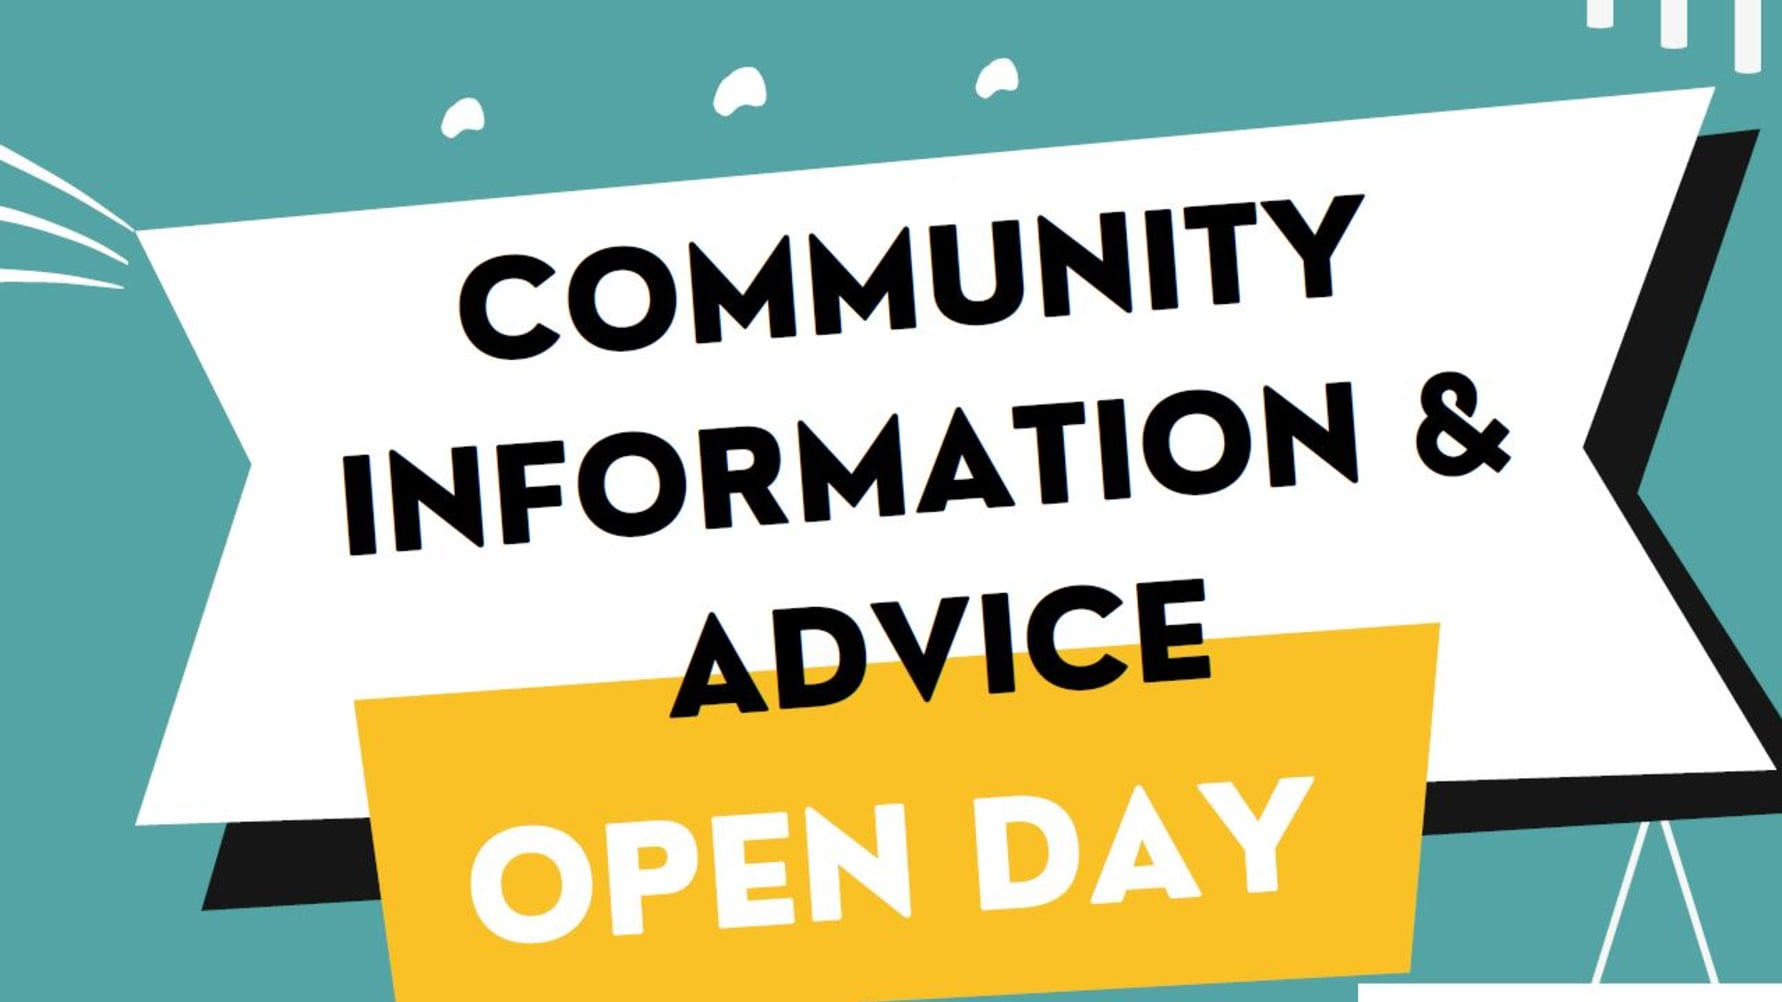 ng homes to host community information and advice open day